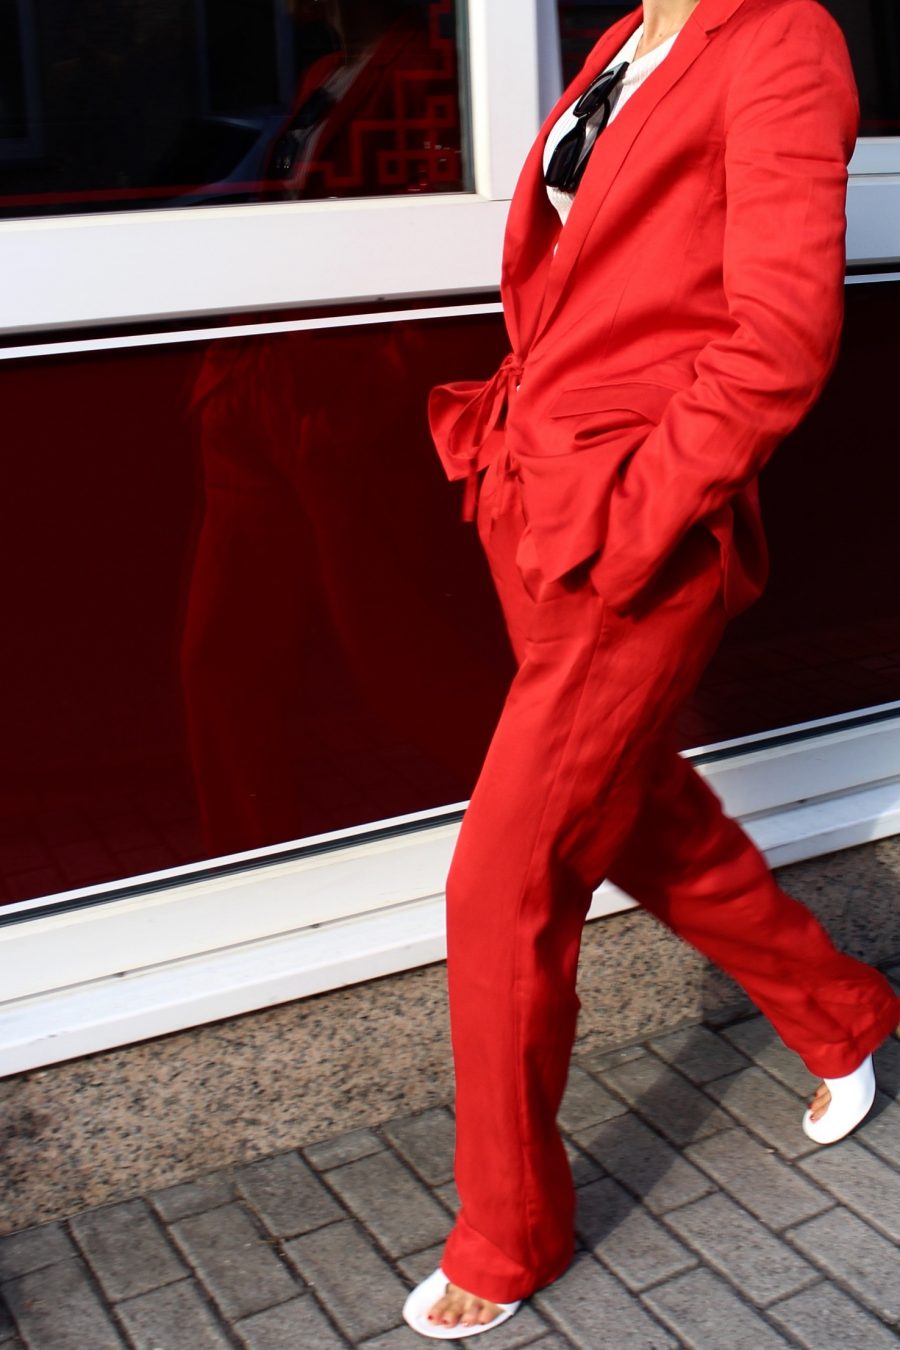 red suit fall winter trend 2017